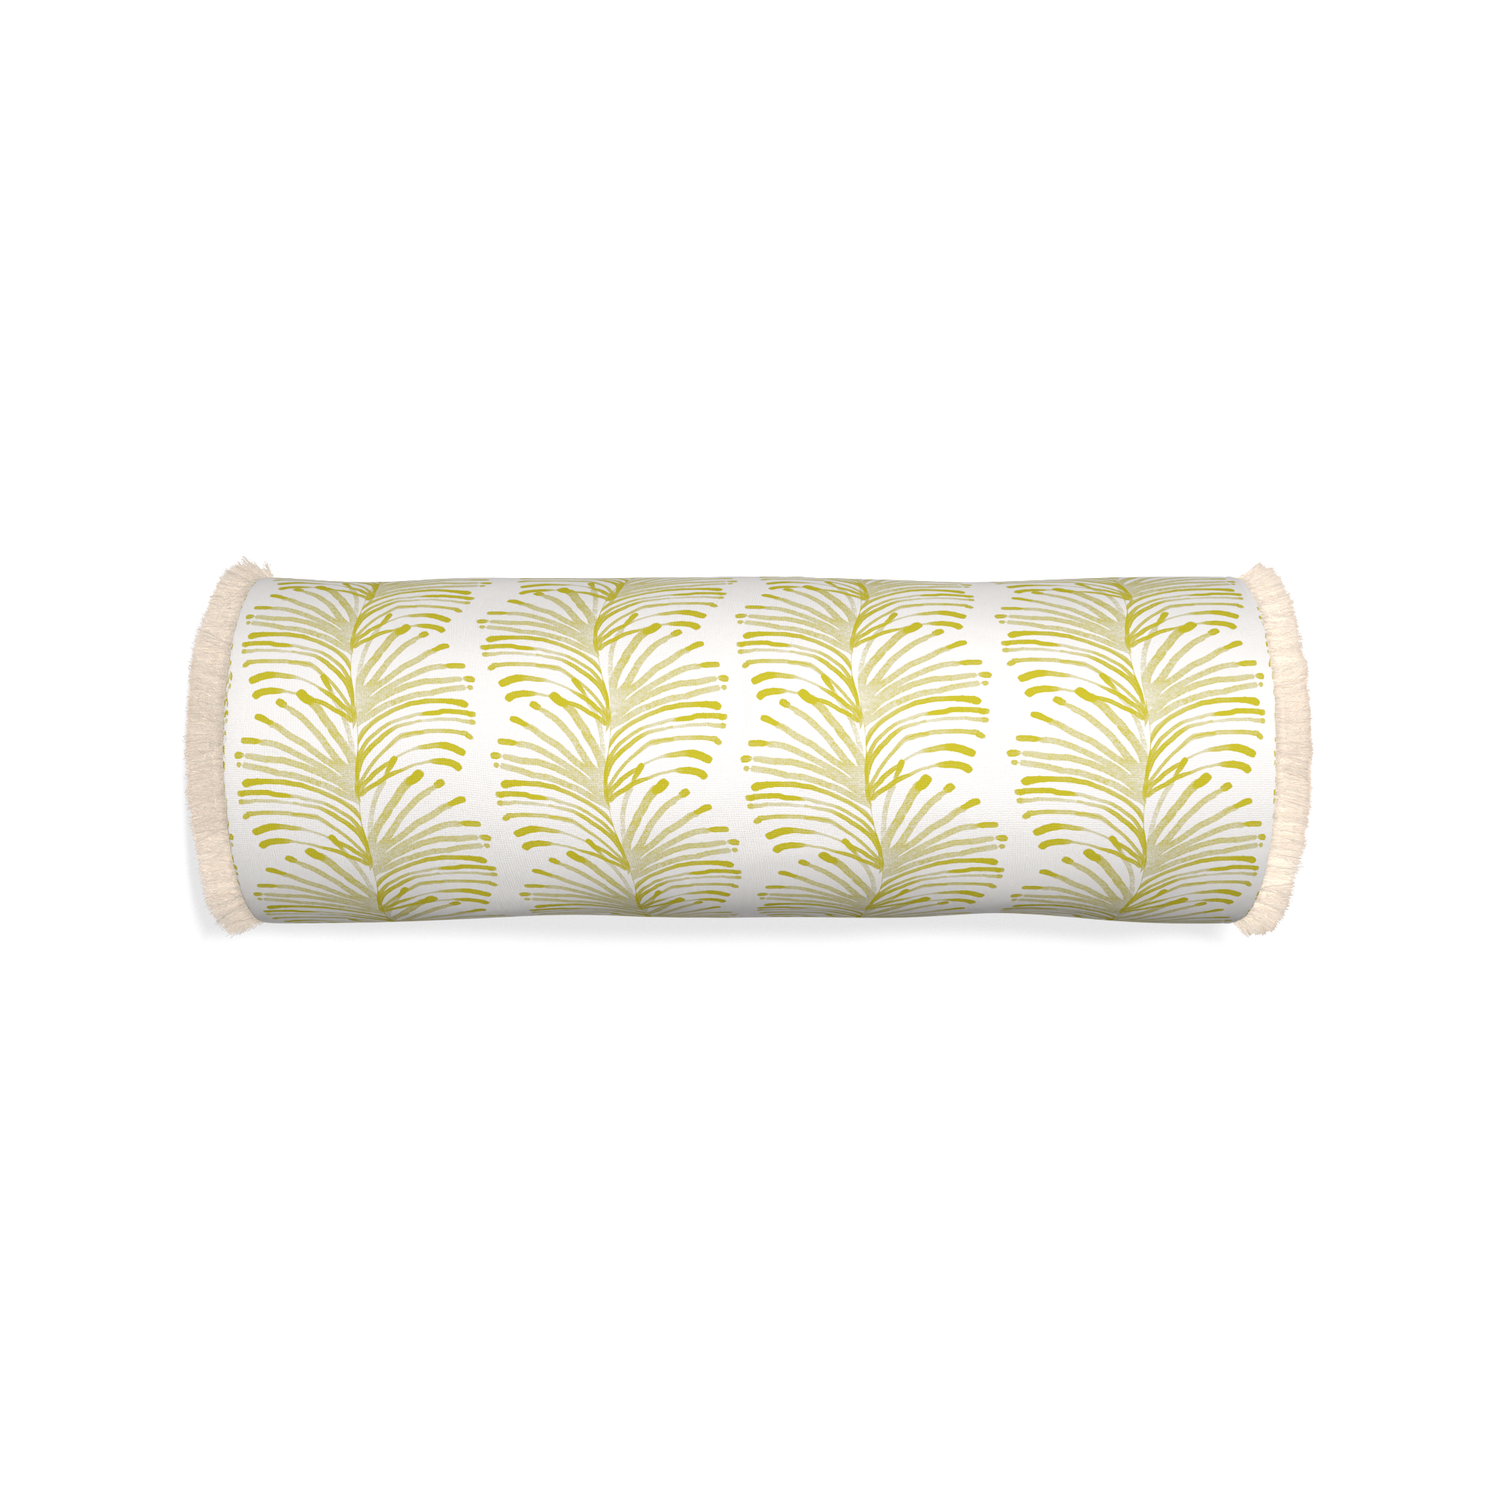 Bolster emma chartreuse custom yellow stripe chartreusepillow with cream fringe on white background